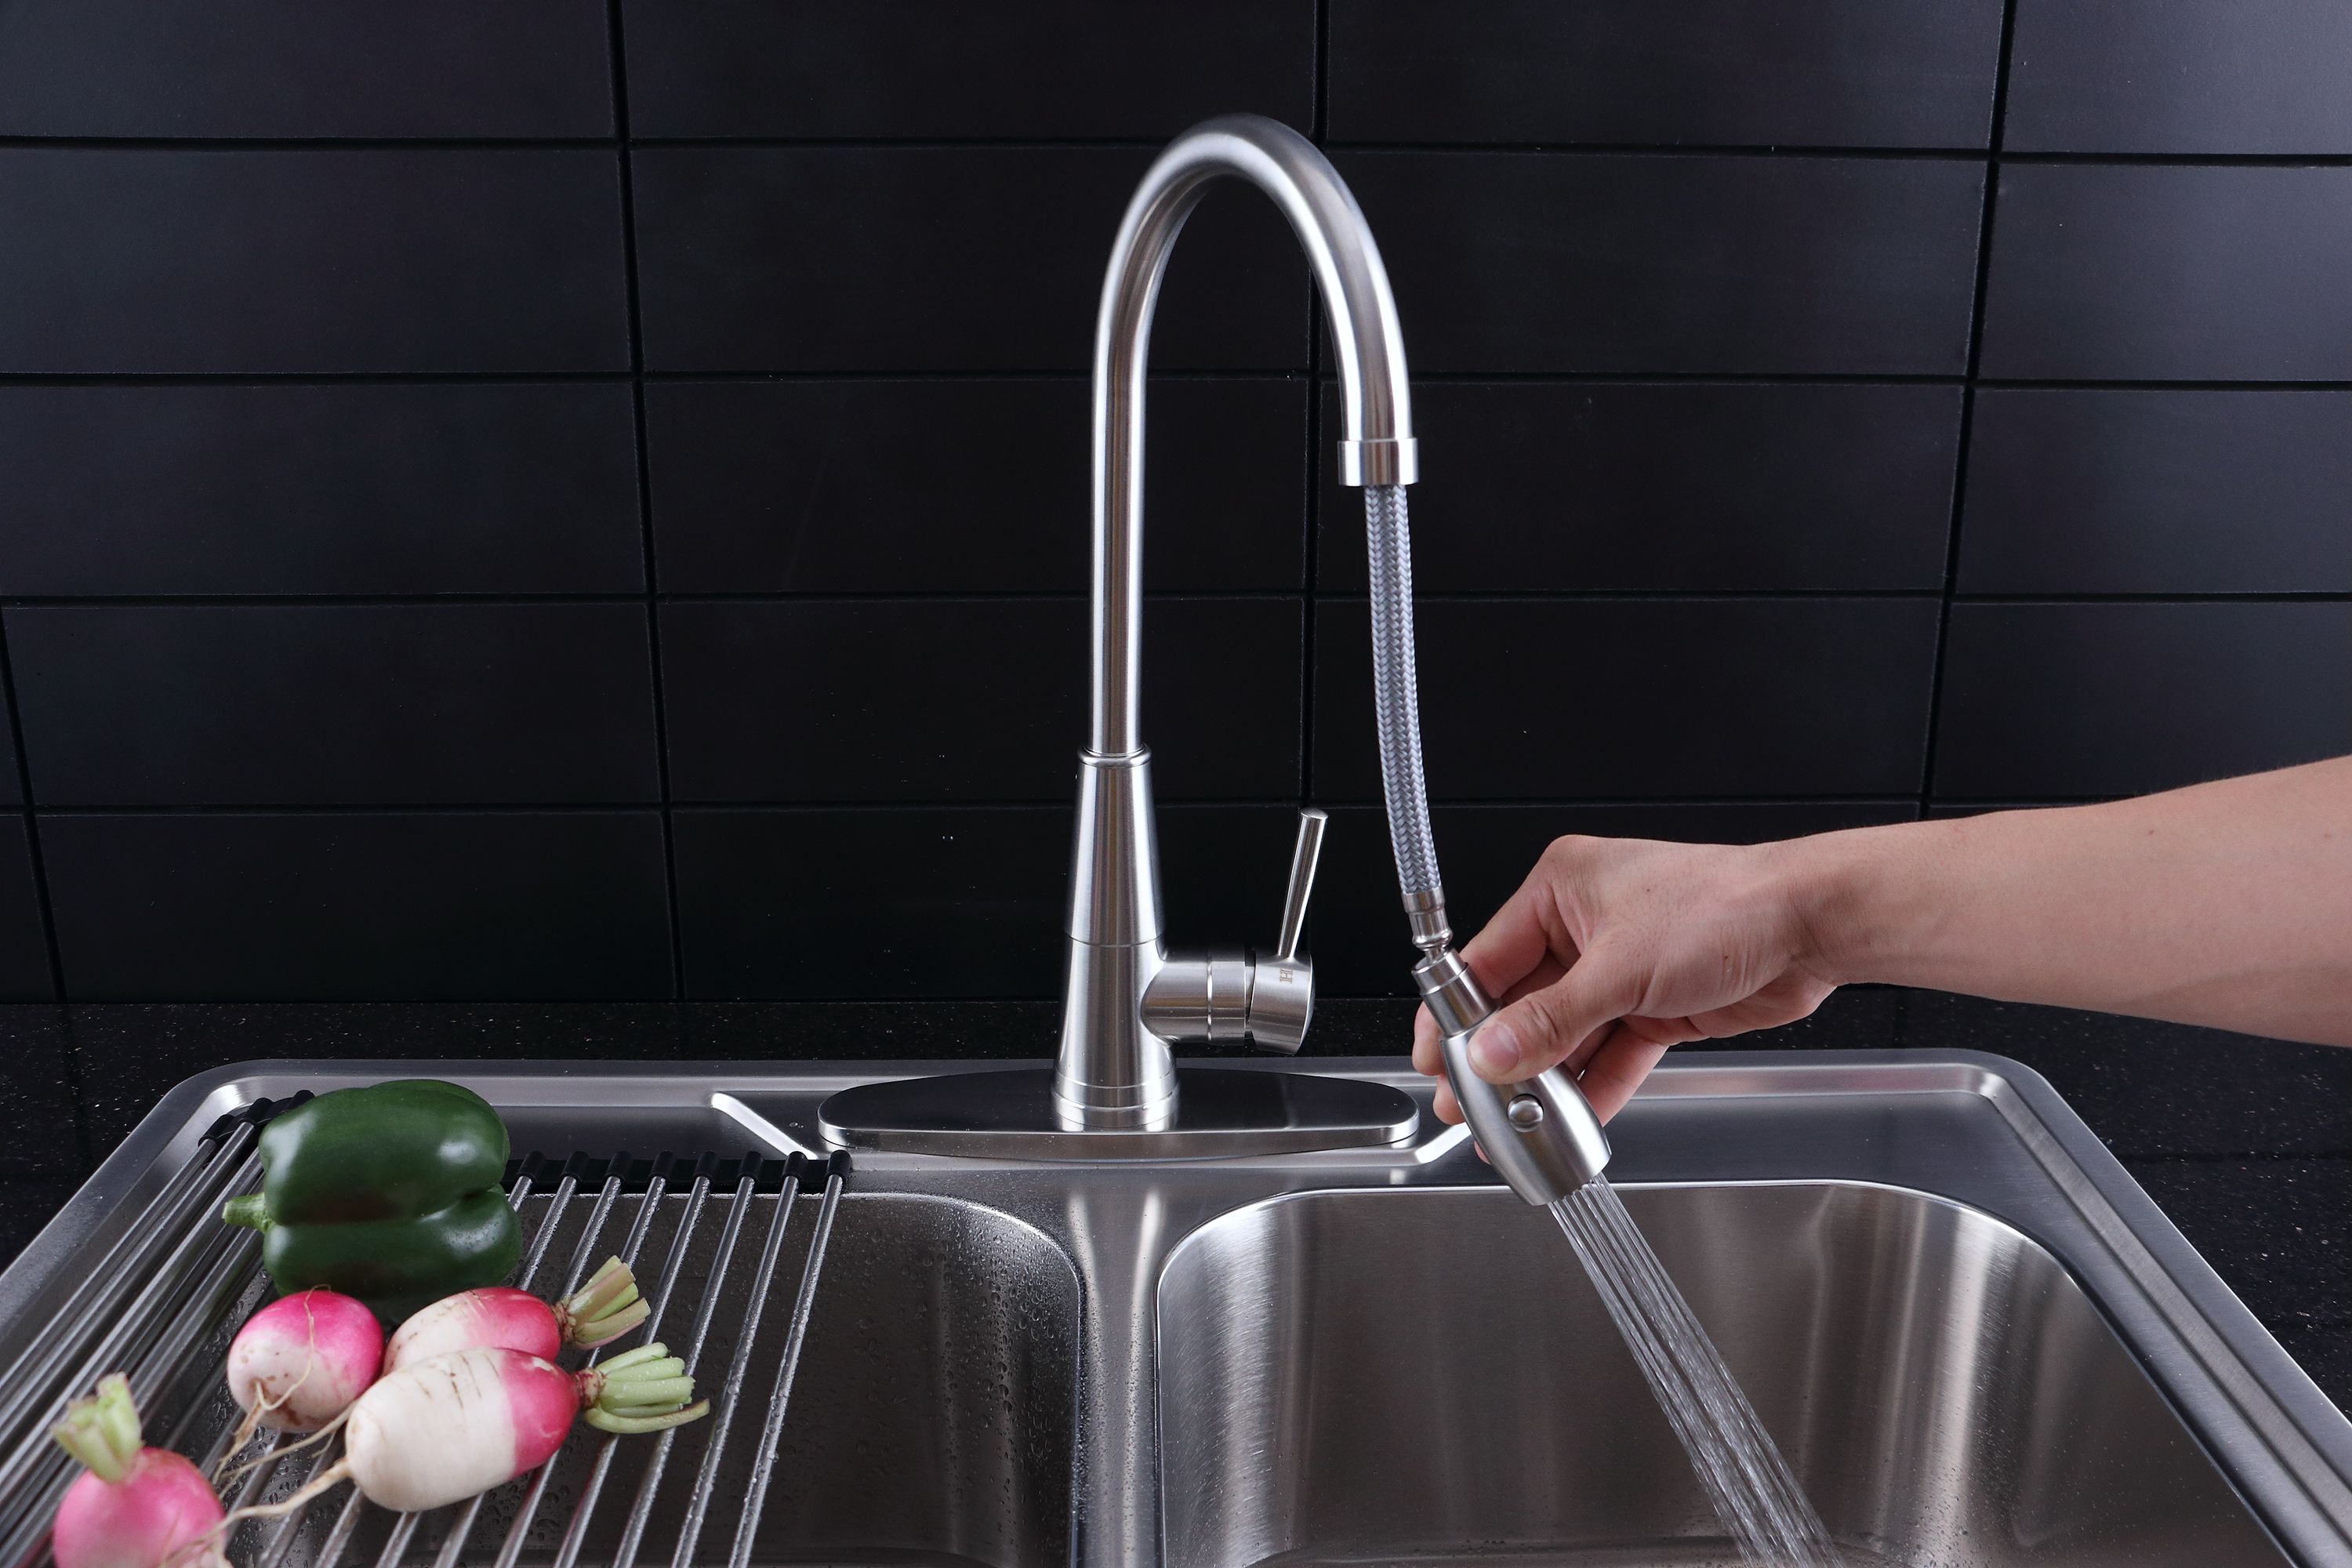 tub faucet that extends like kitchen sink